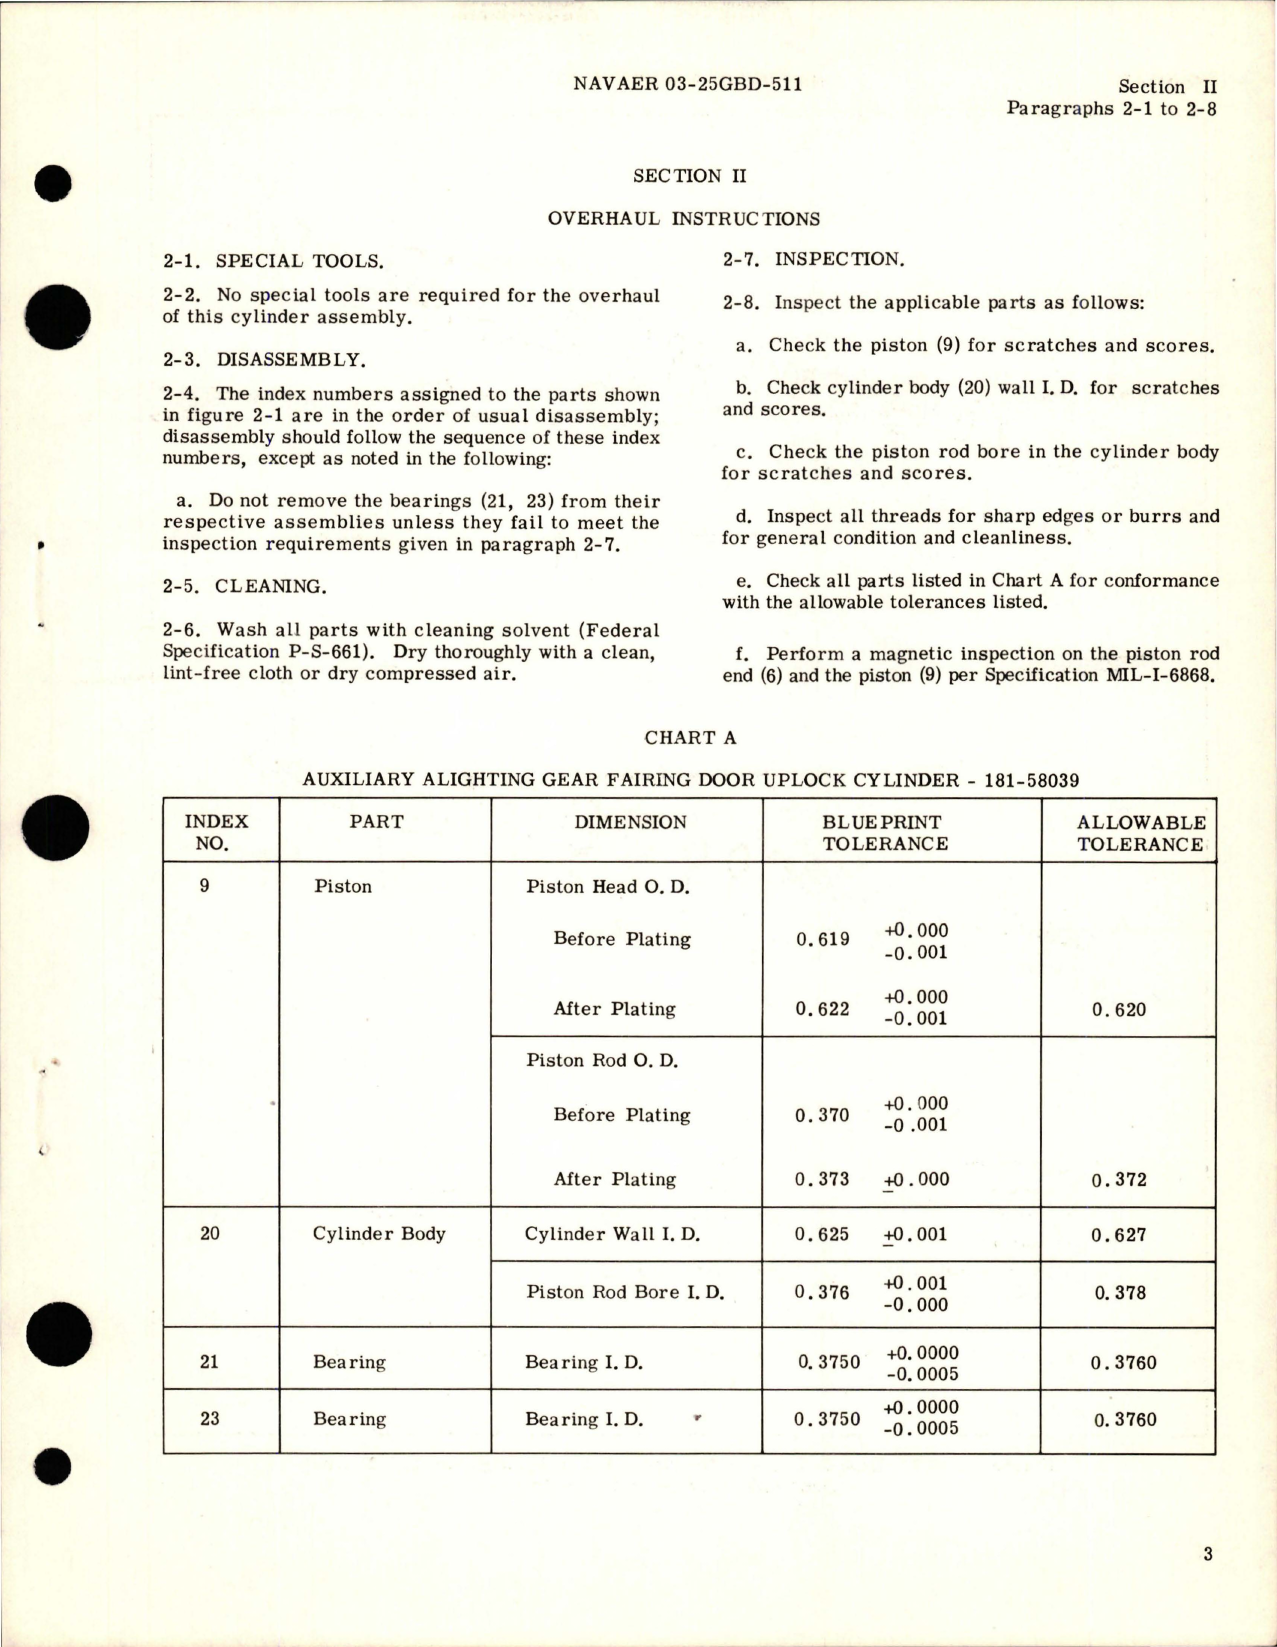 Sample page 5 from AirCorps Library document: Overhaul Instructions for Hydraulic Auxiliary Alighting Gear Fairing Door Uplock Cylinder Assembly - Part 181-58039-3